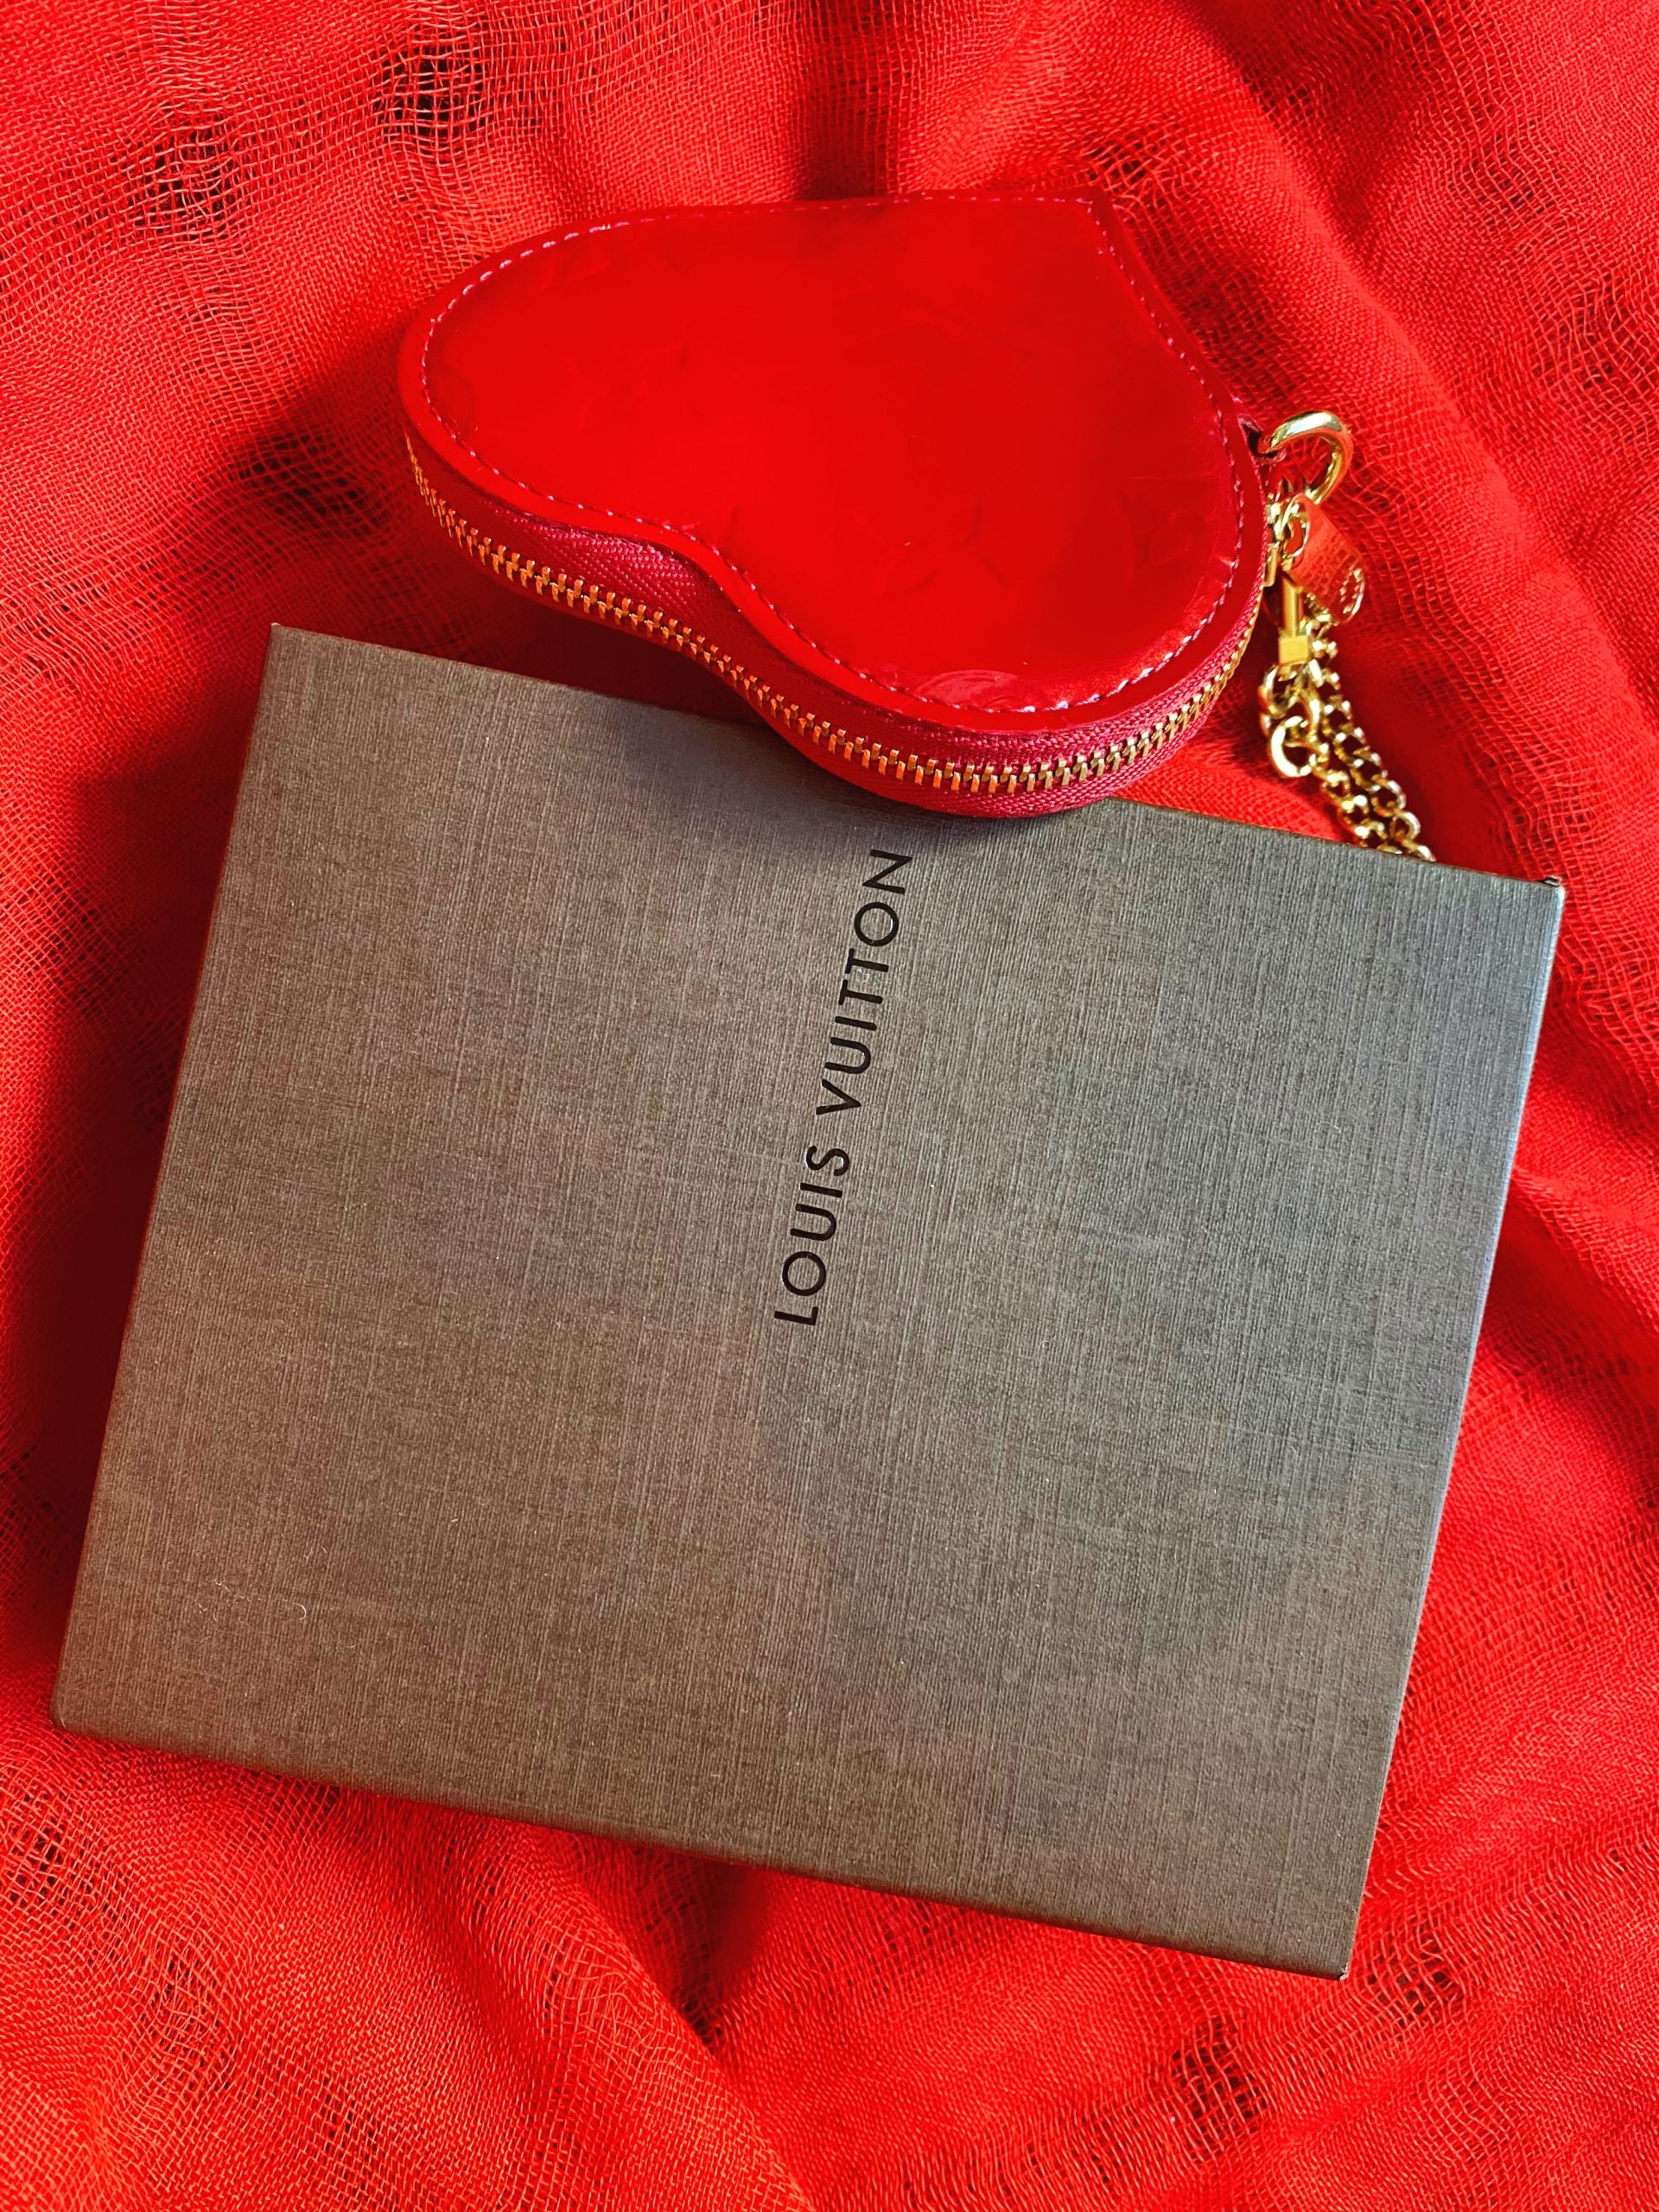 Louis Vuitton Heart Coin Purse Limited Edition Vernis Red 1616092